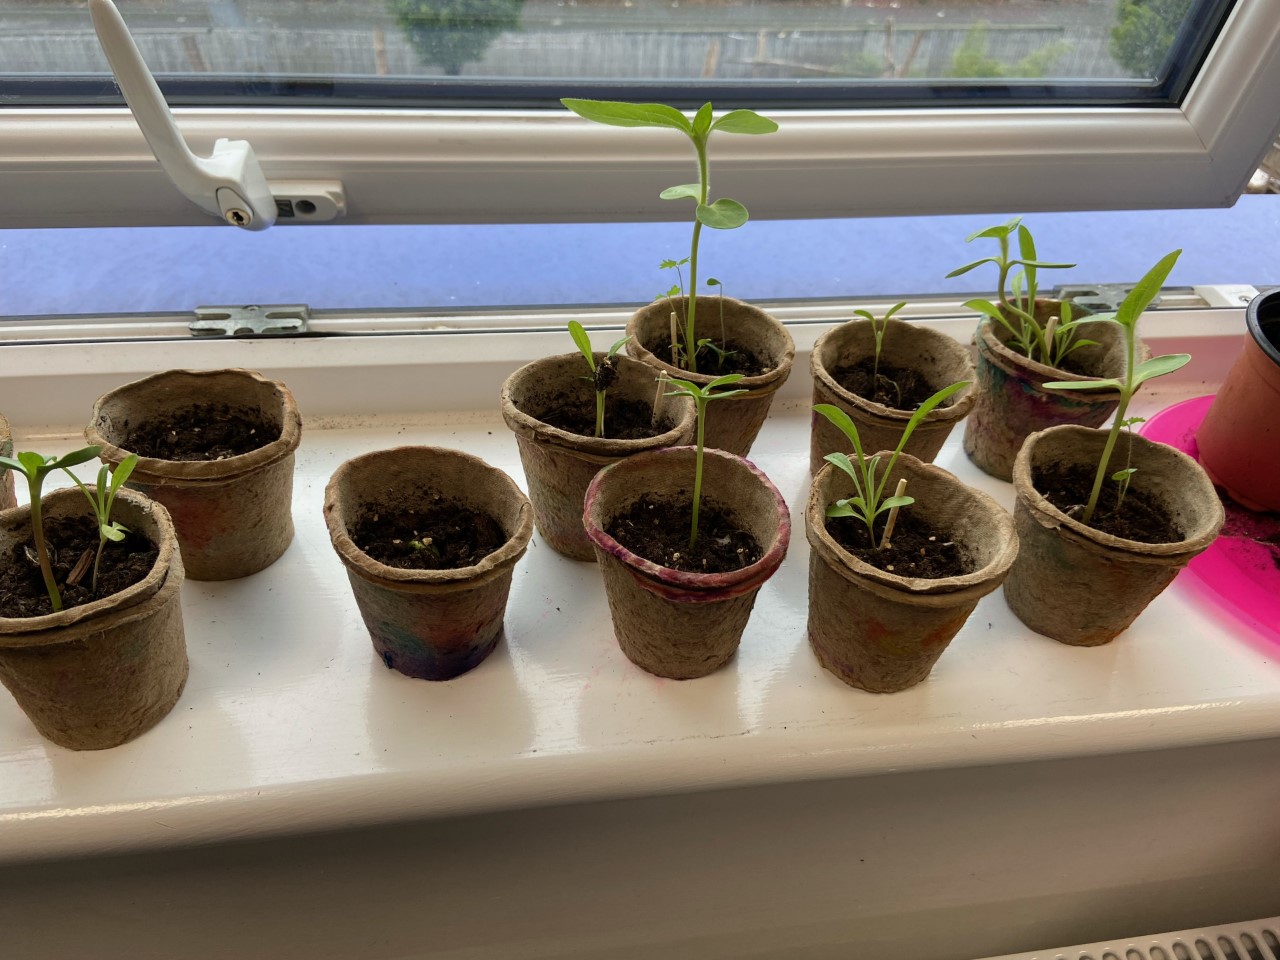 week 5 sunflowers planted by some Year 3 children - judy y